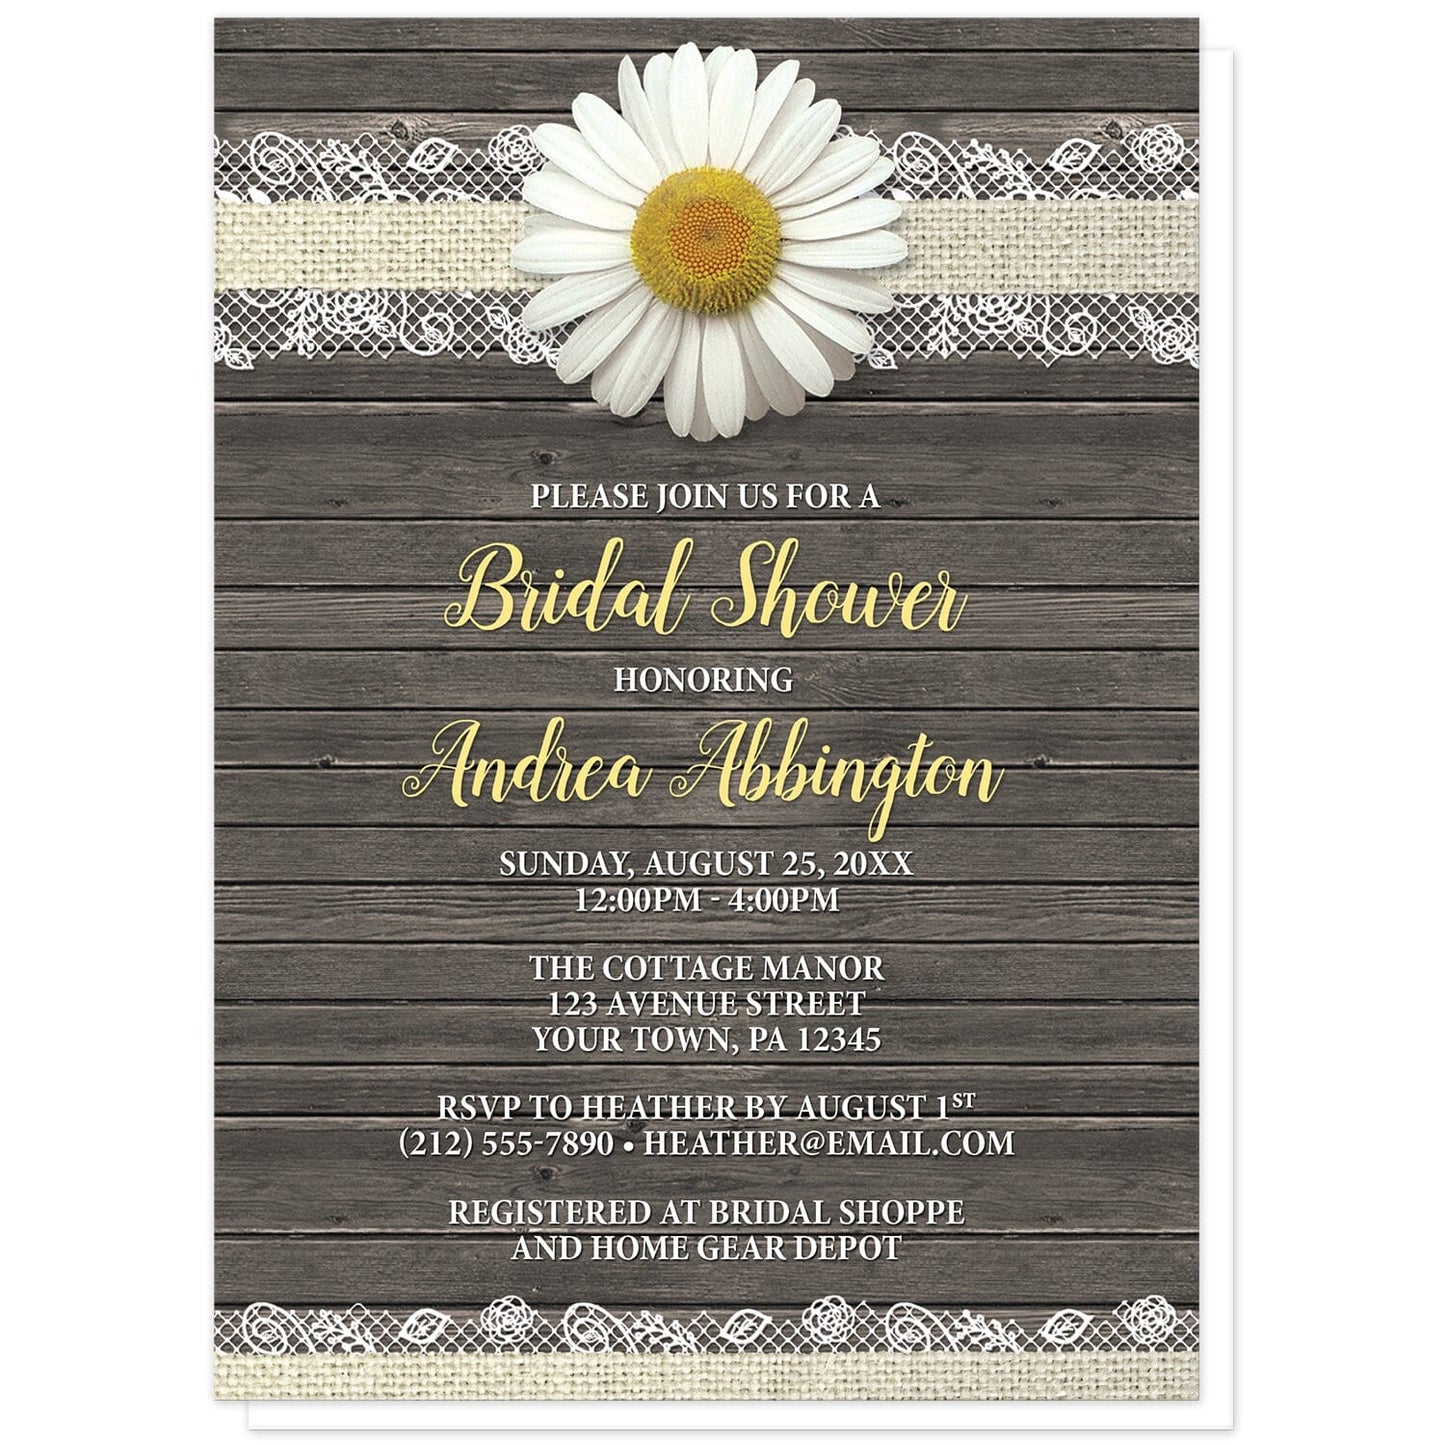 Daisy Burlap and Lace Wood Bridal Shower Invitations at Artistically Invited. Southern rustic daisy burlap and lace wood bridal shower invitations with a white daisy flower centered at the top on a burlap and lace ribbon strip illustration, over a country brown wood background. Your personalized bridal shower celebration details are custom printed in yellow and white over the wood design.